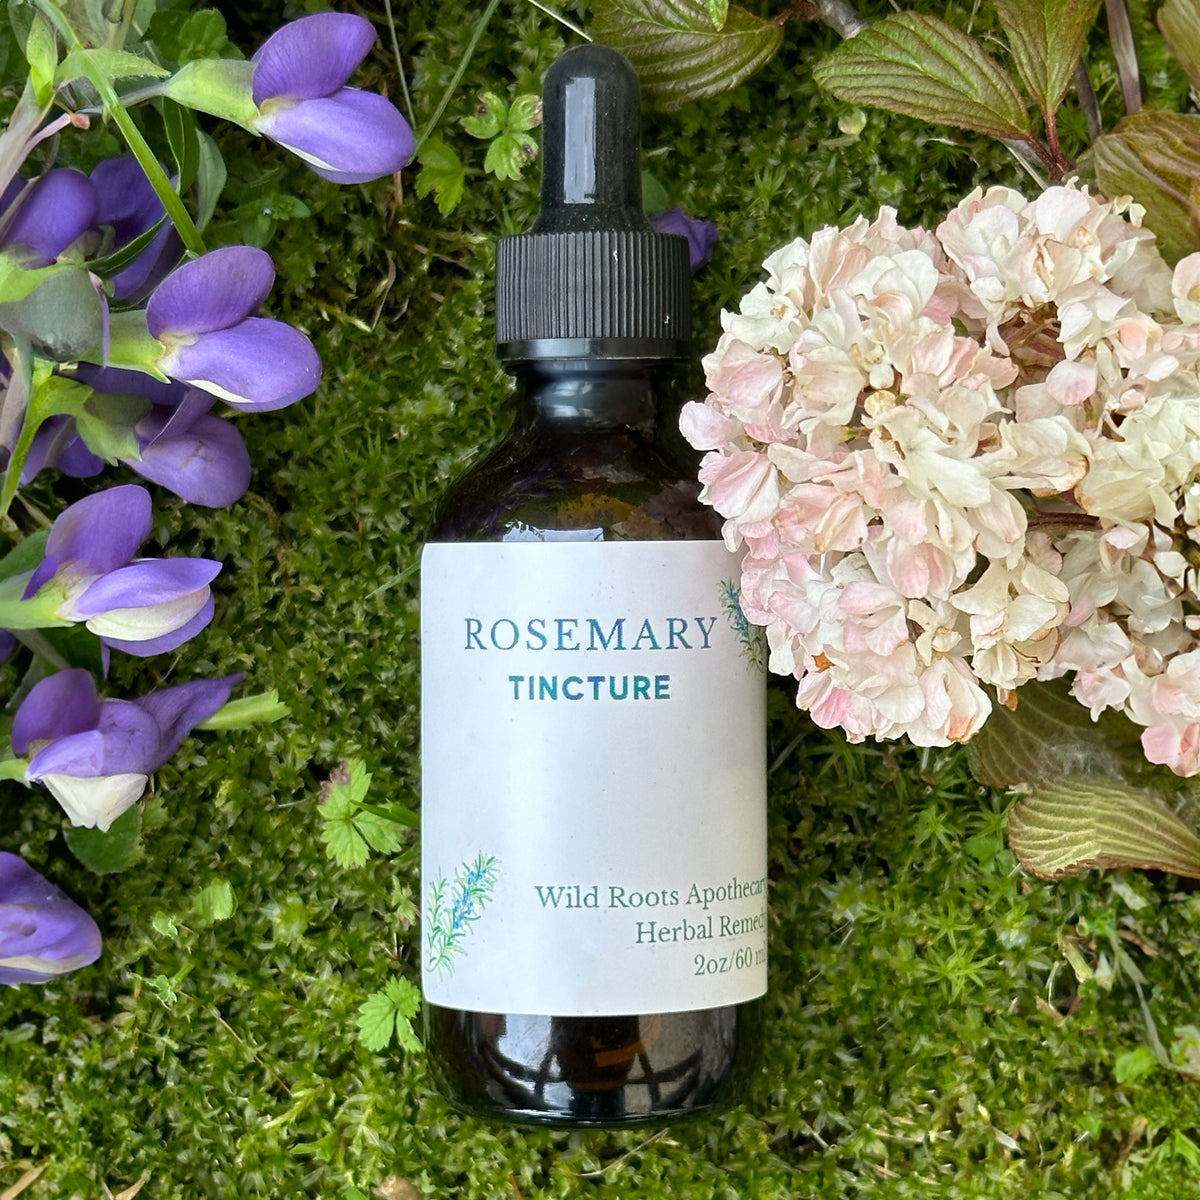 Rosemary Tincture—Wild Roots Apothecary